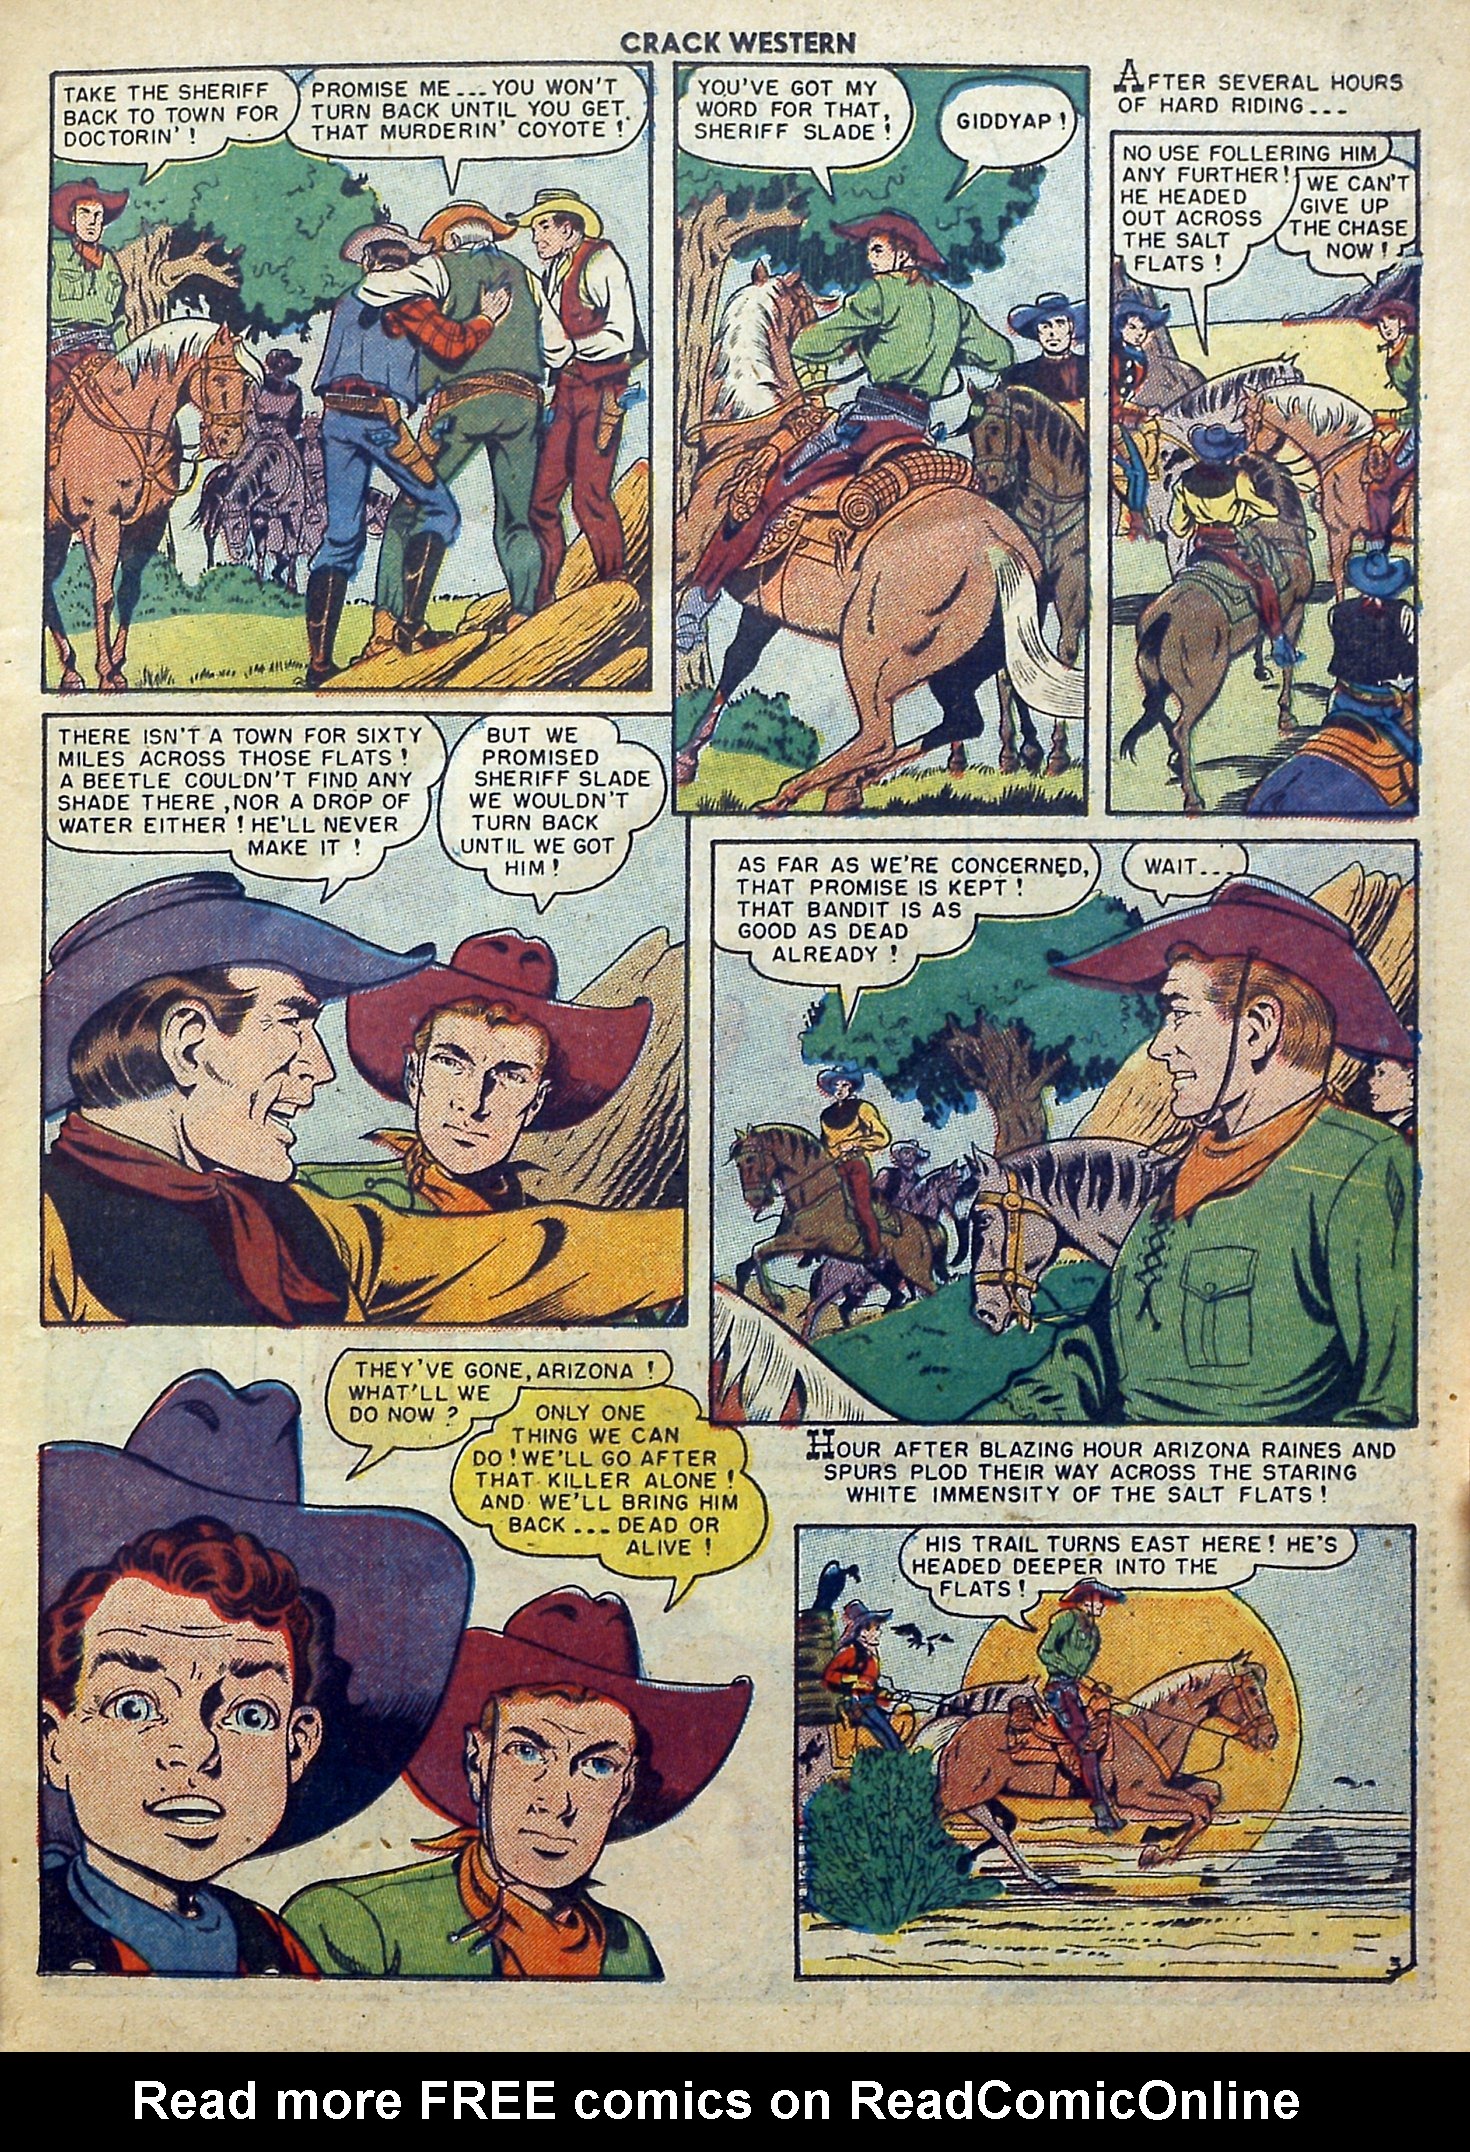 Read online Crack Western comic -  Issue #68 - 5